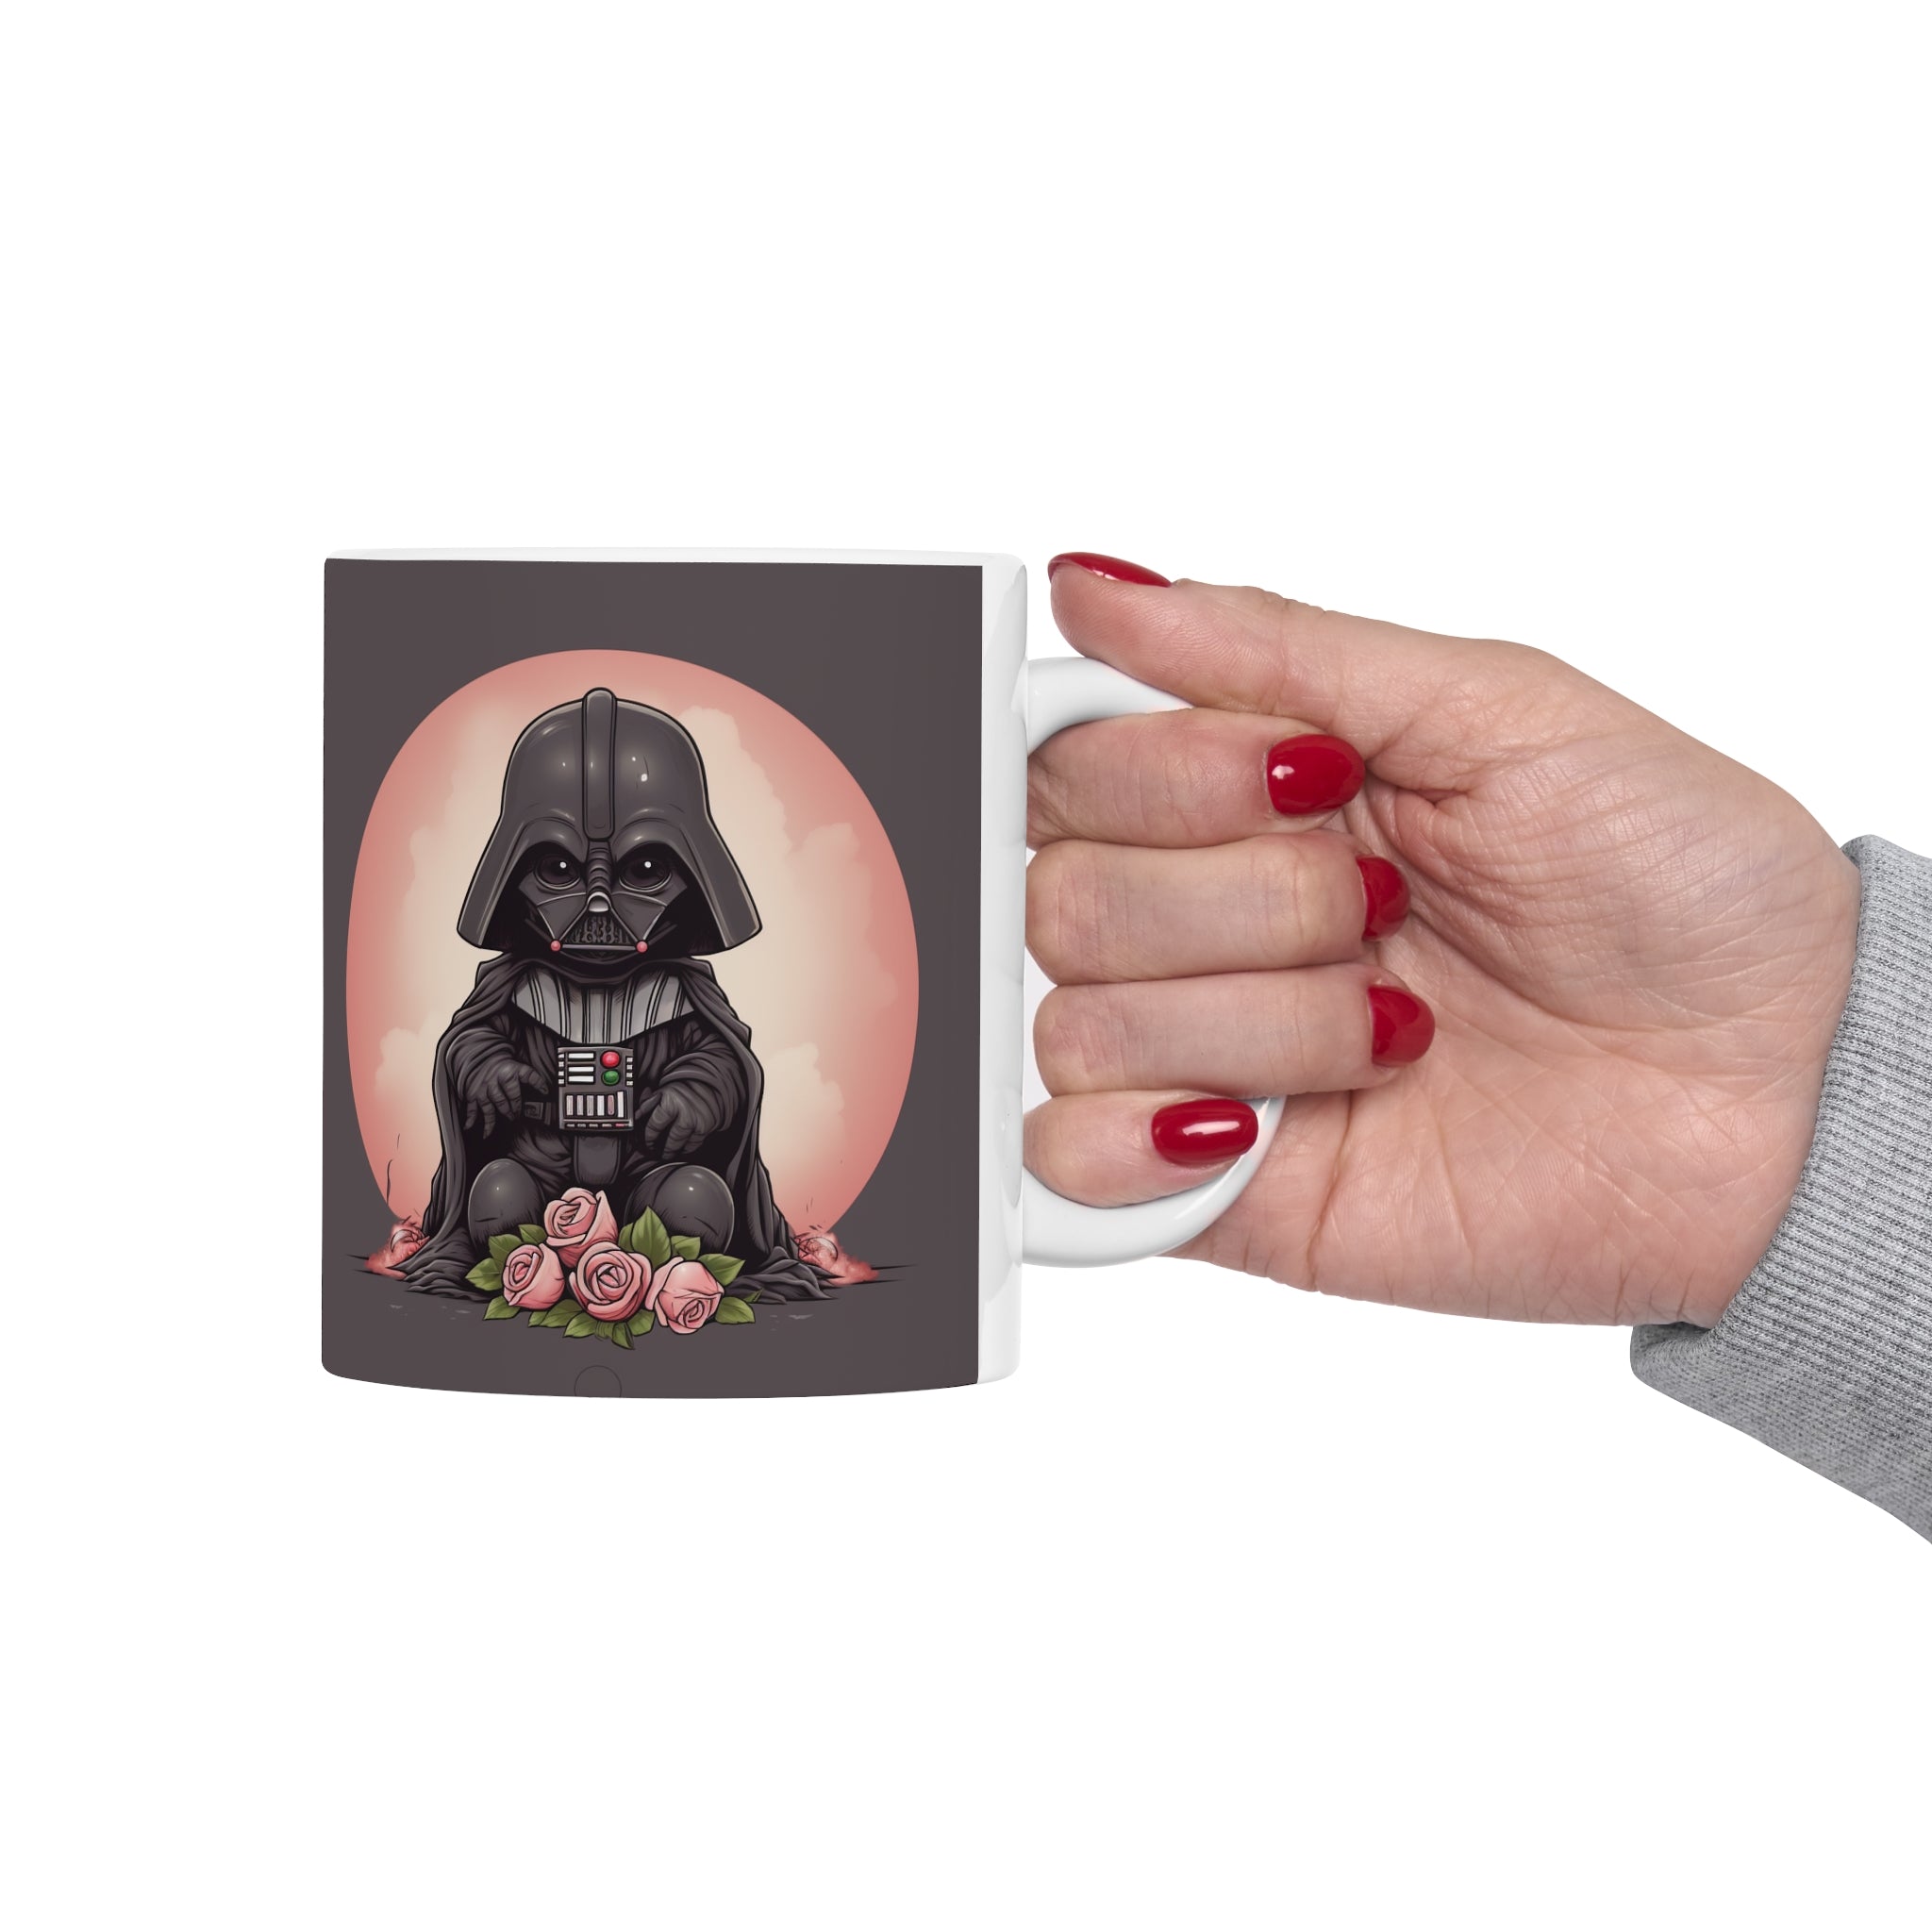 Proven Conversation Starter! Add to Your Collection to Bring it All Together. Classic Galaxy Villain Romantic Cupid Ceramic Mug 11oz - Unique Gift for the One You Love or Ideal Gift for Friends and Family